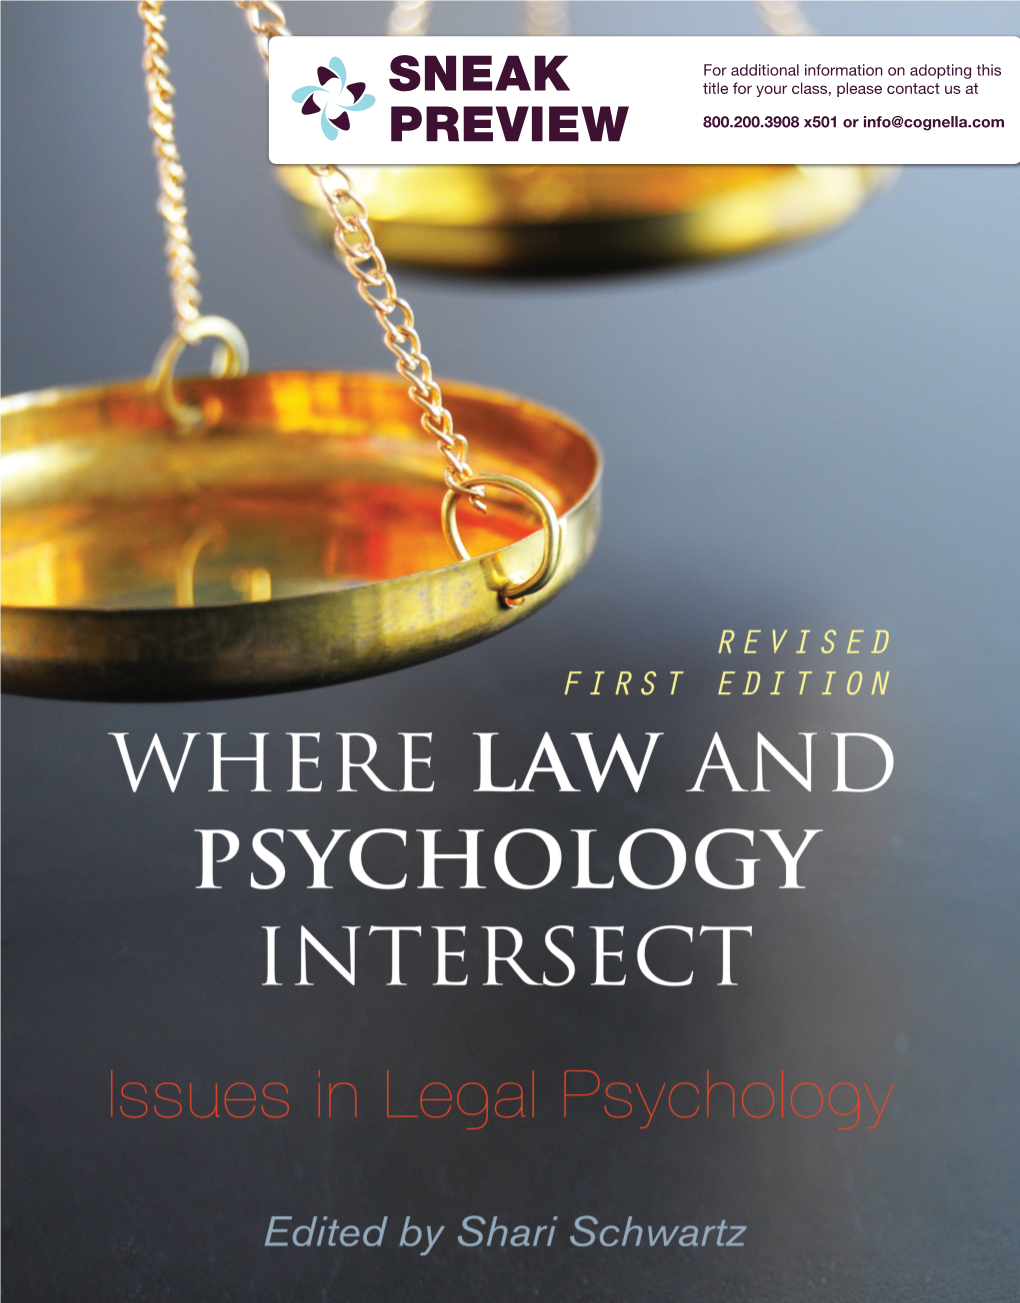 Where Law and Psychology Intersect Issues in Legal Psychology